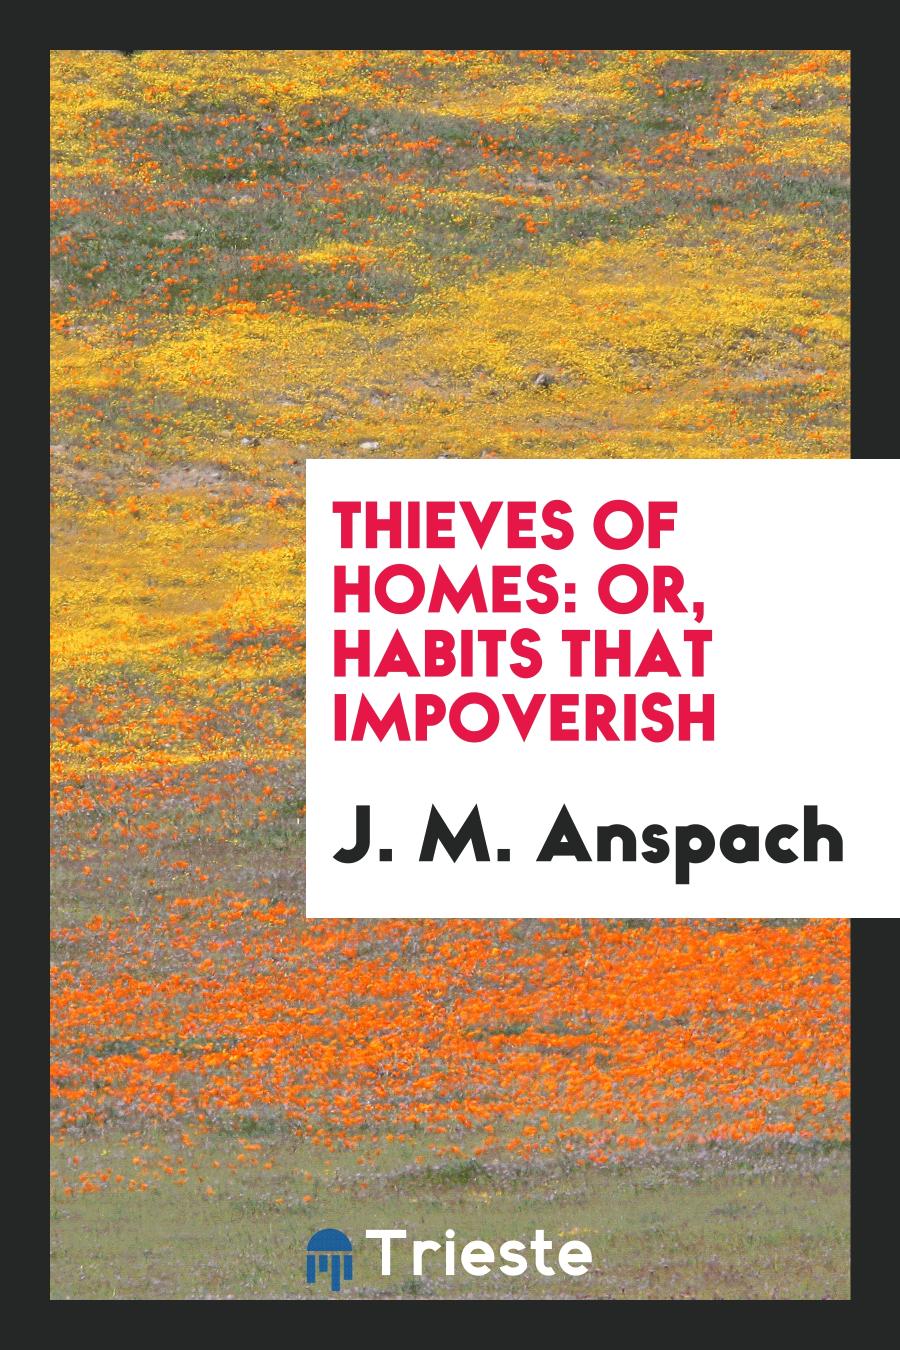 Thieves of Homes: Or, Habits That Impoverish